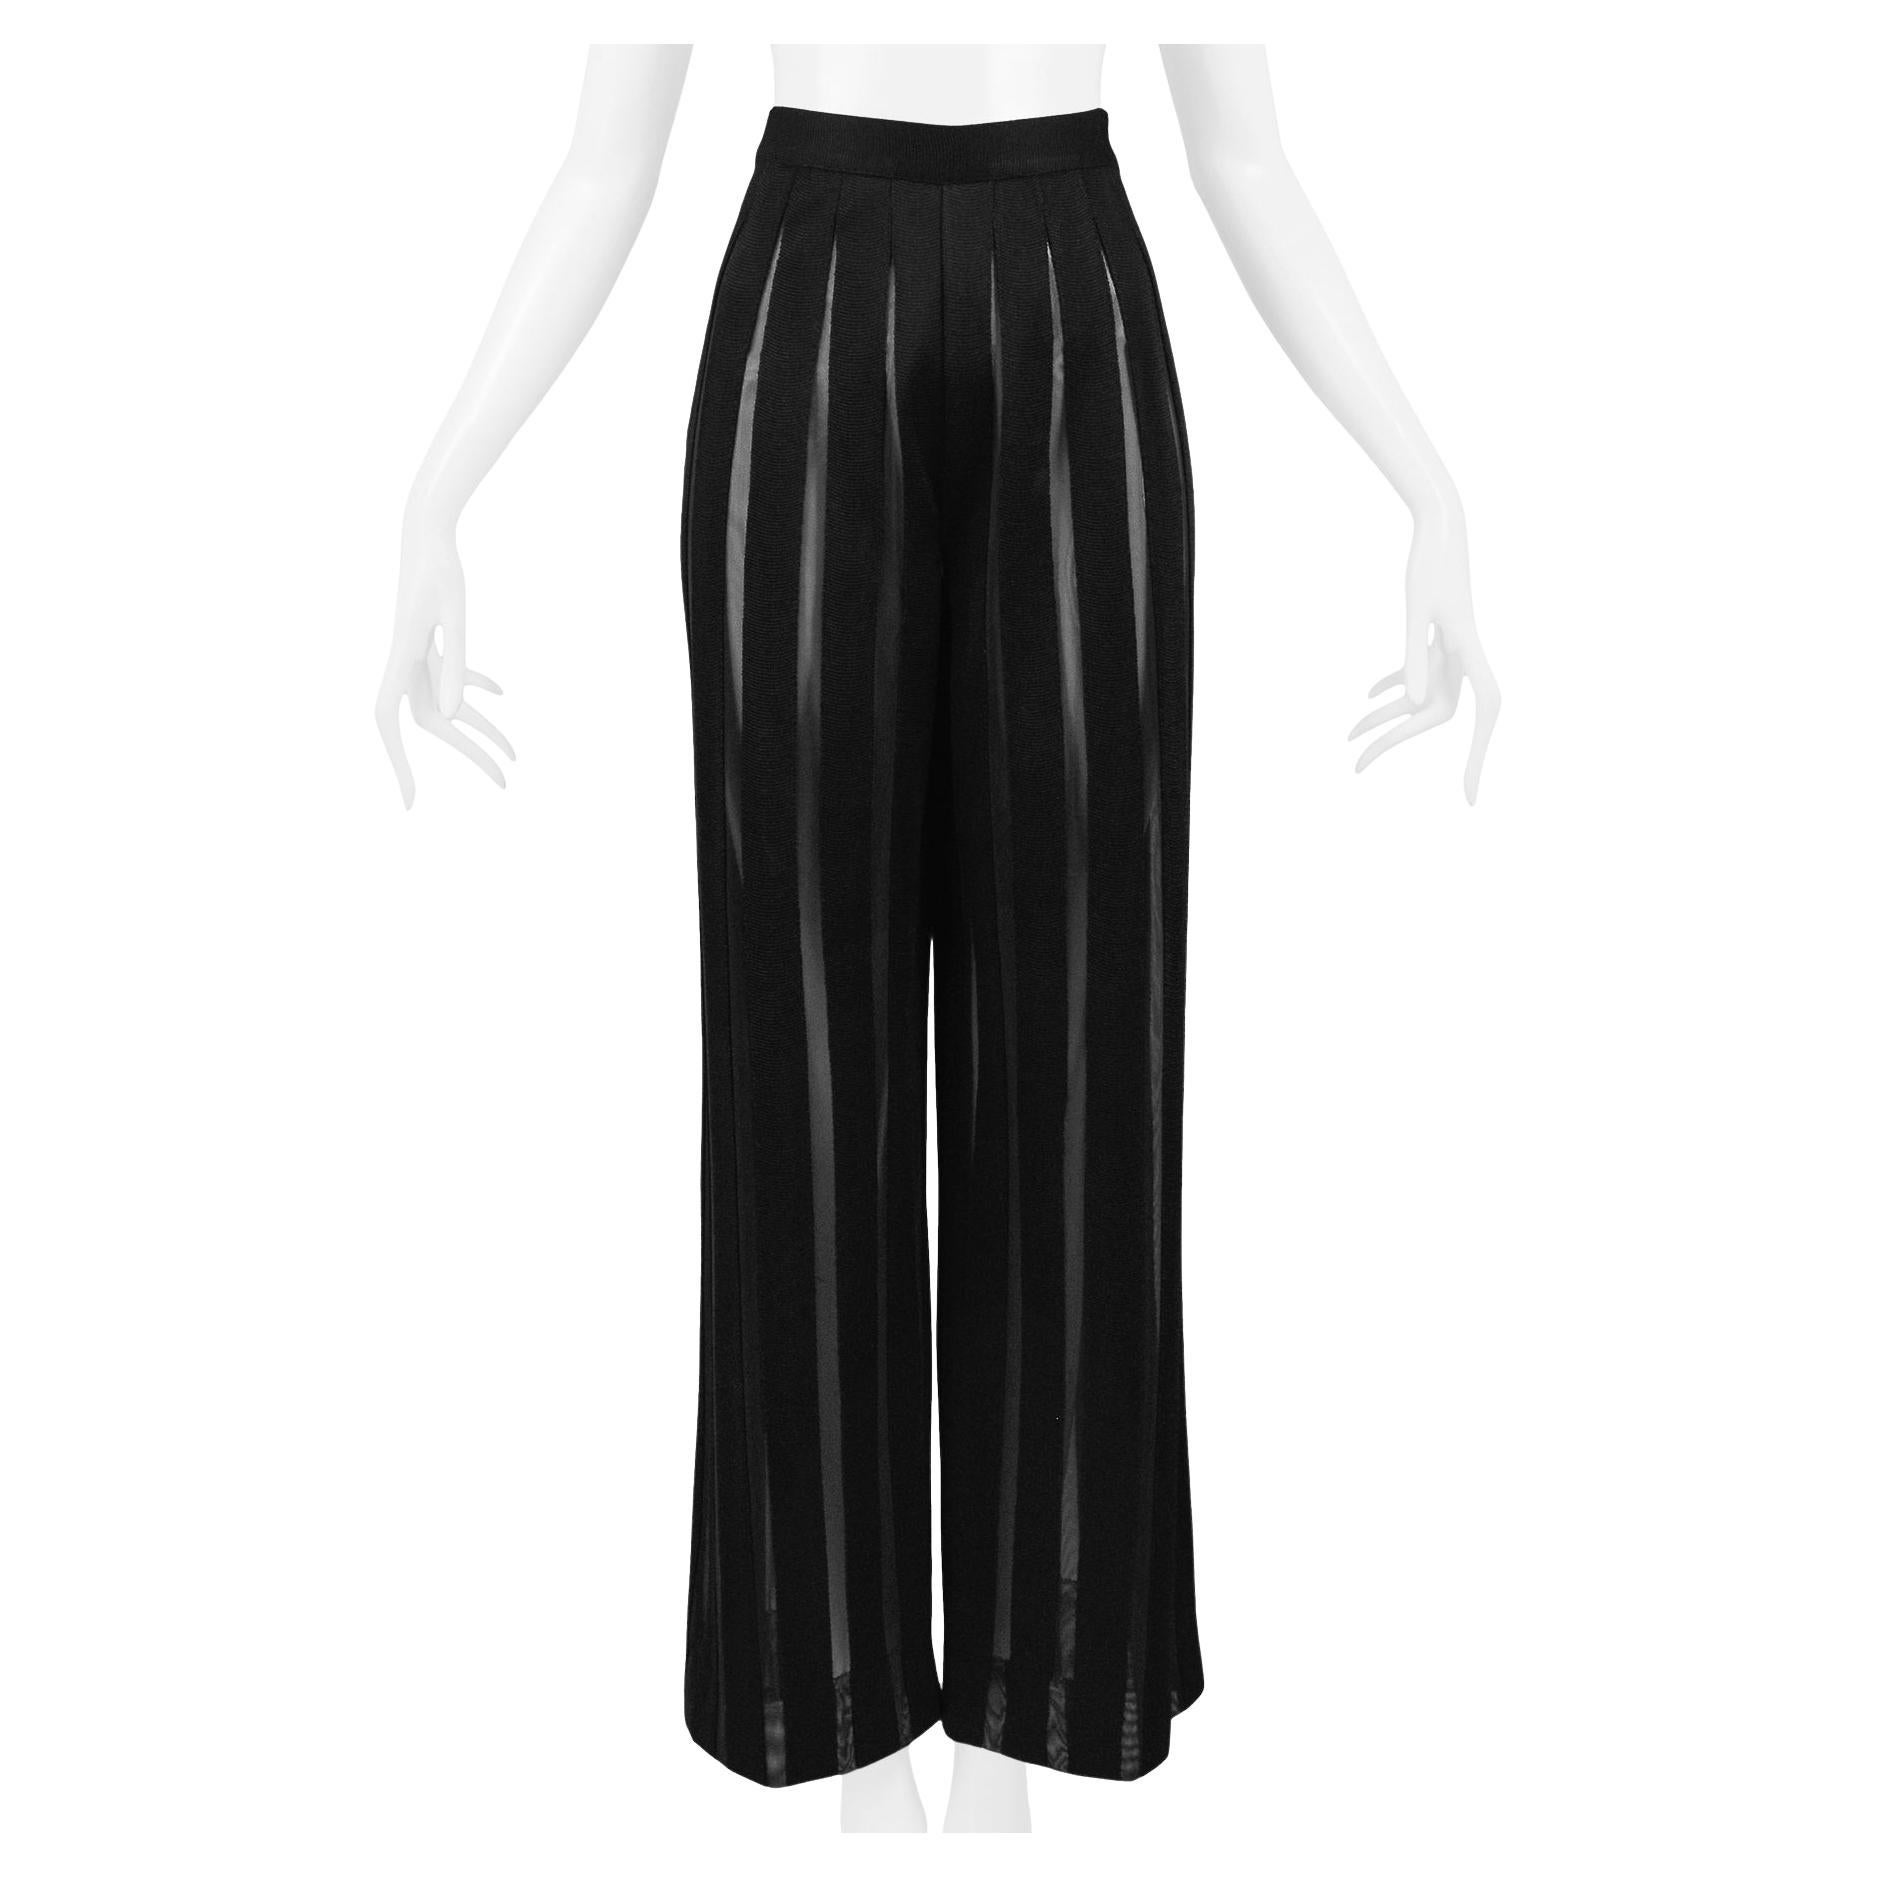 Gianfranco Ferre Black Knit Pants With Sheer Illusion Panels For Sale